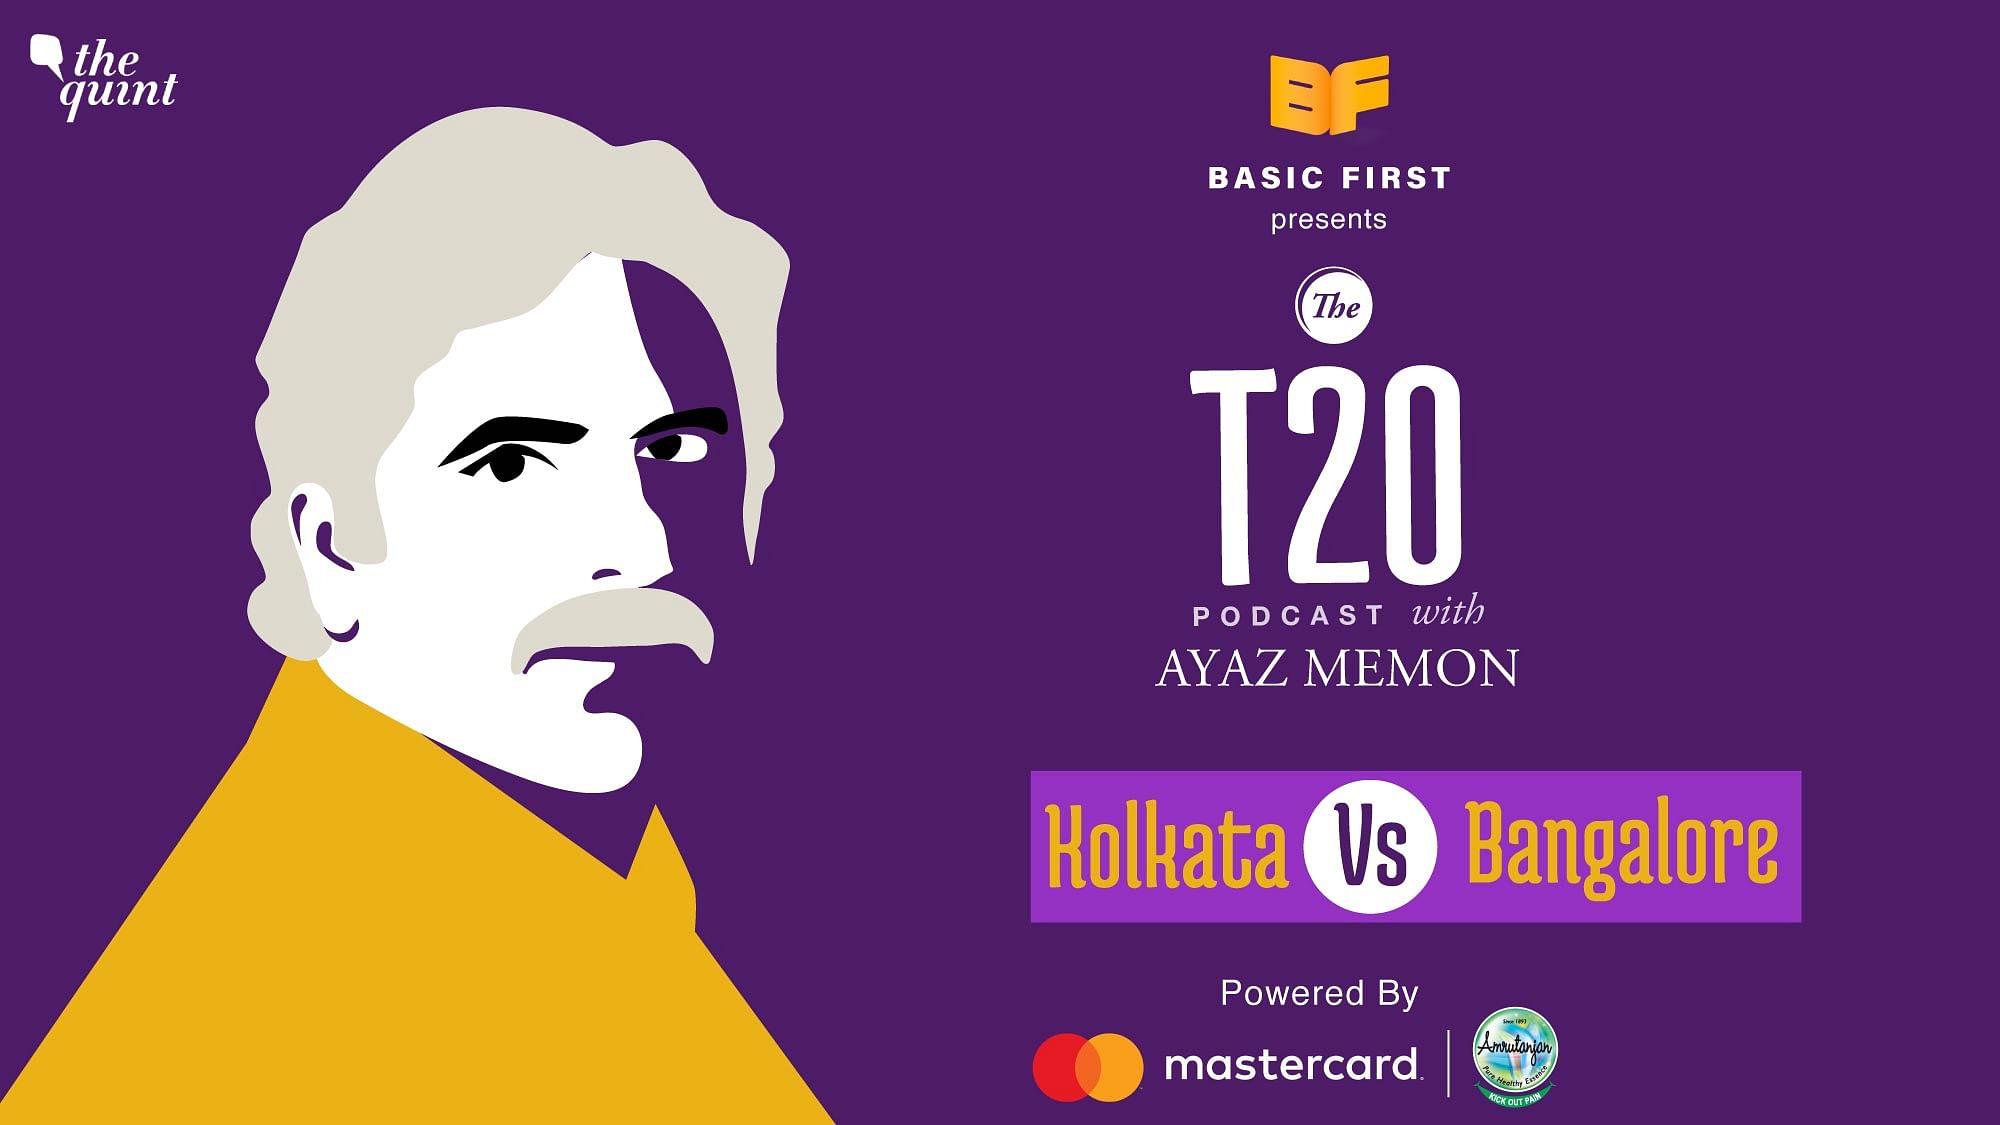 On Episode 39 of The T20 Podcast, Ayaz Memon and Mendra Dorjey talk about Mohammed Siraj’s two maidens vs Kolkata that helped Bangalore close out an easy and commanding 8 wicket win on Wednesday night in Abu Dhabi.